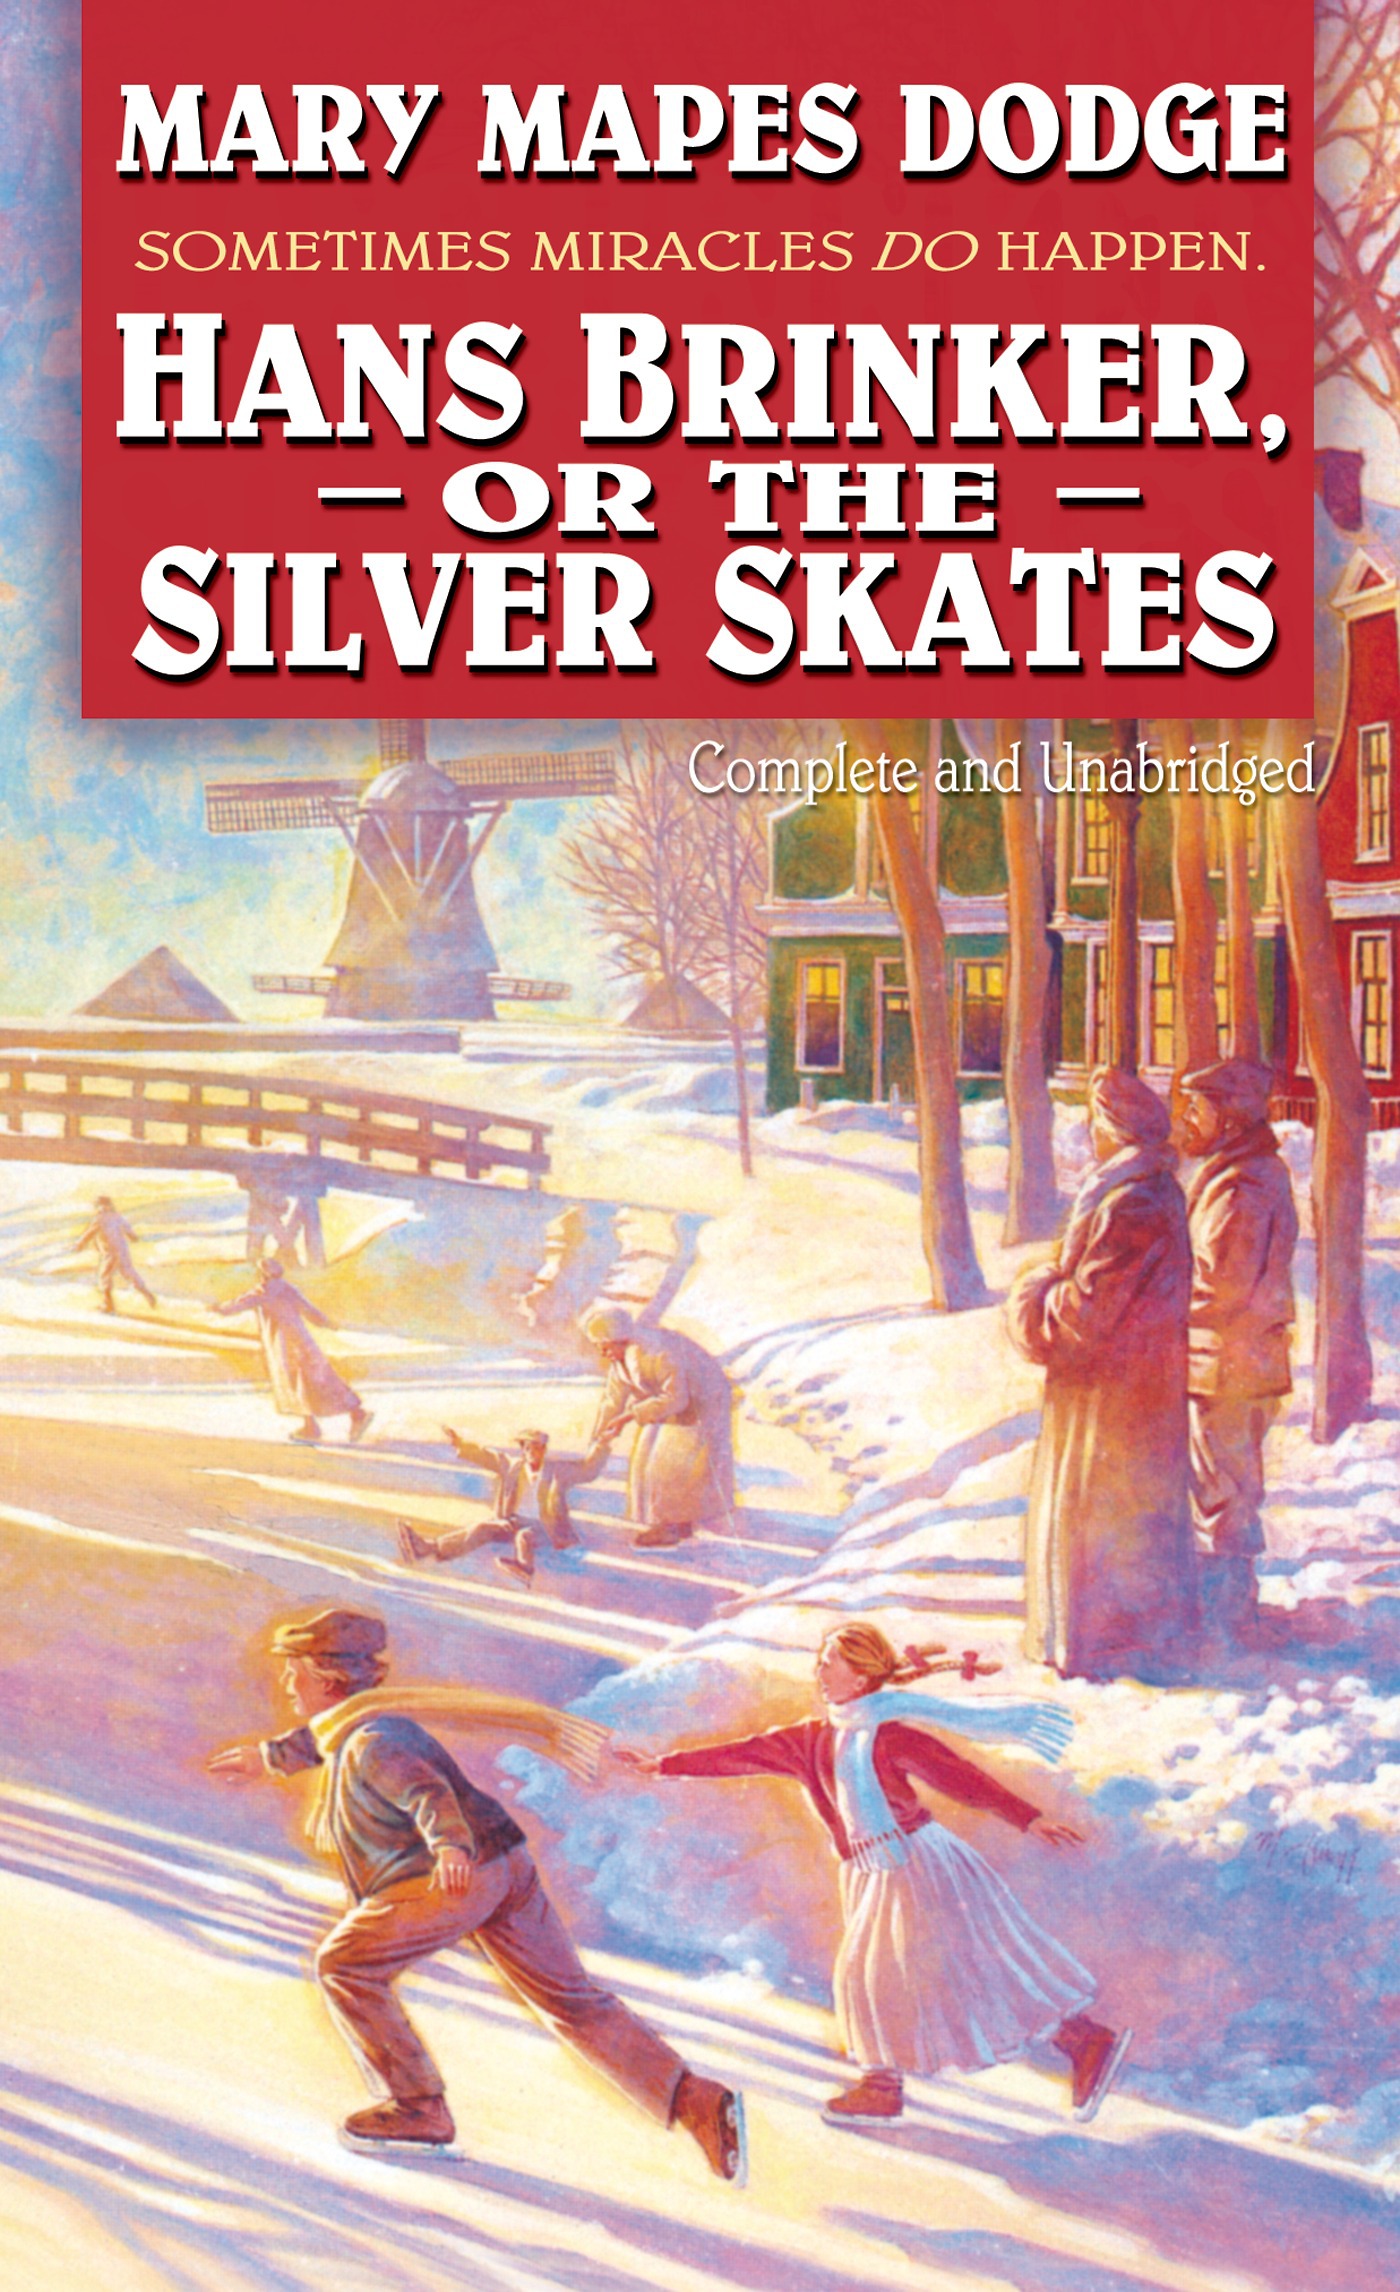 Hans Brinker or the Silver Skates : Complete and Unabridged by Mary Mapes Dodge